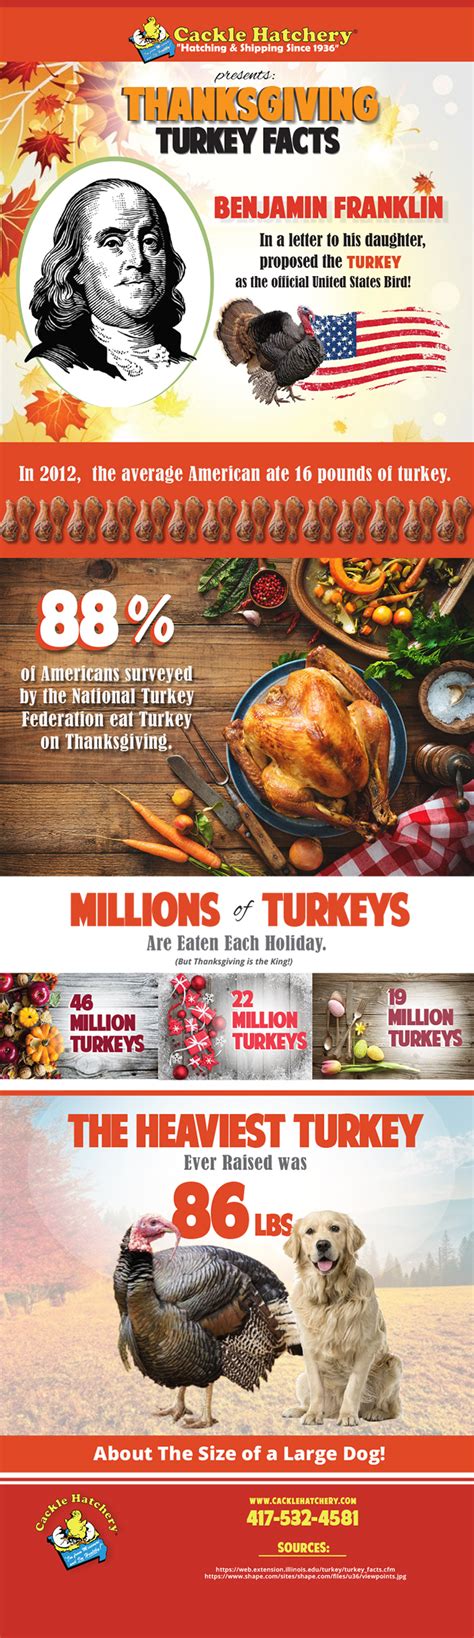 Thanksgiving Turkey Facts Infographic Cackle Hatchery